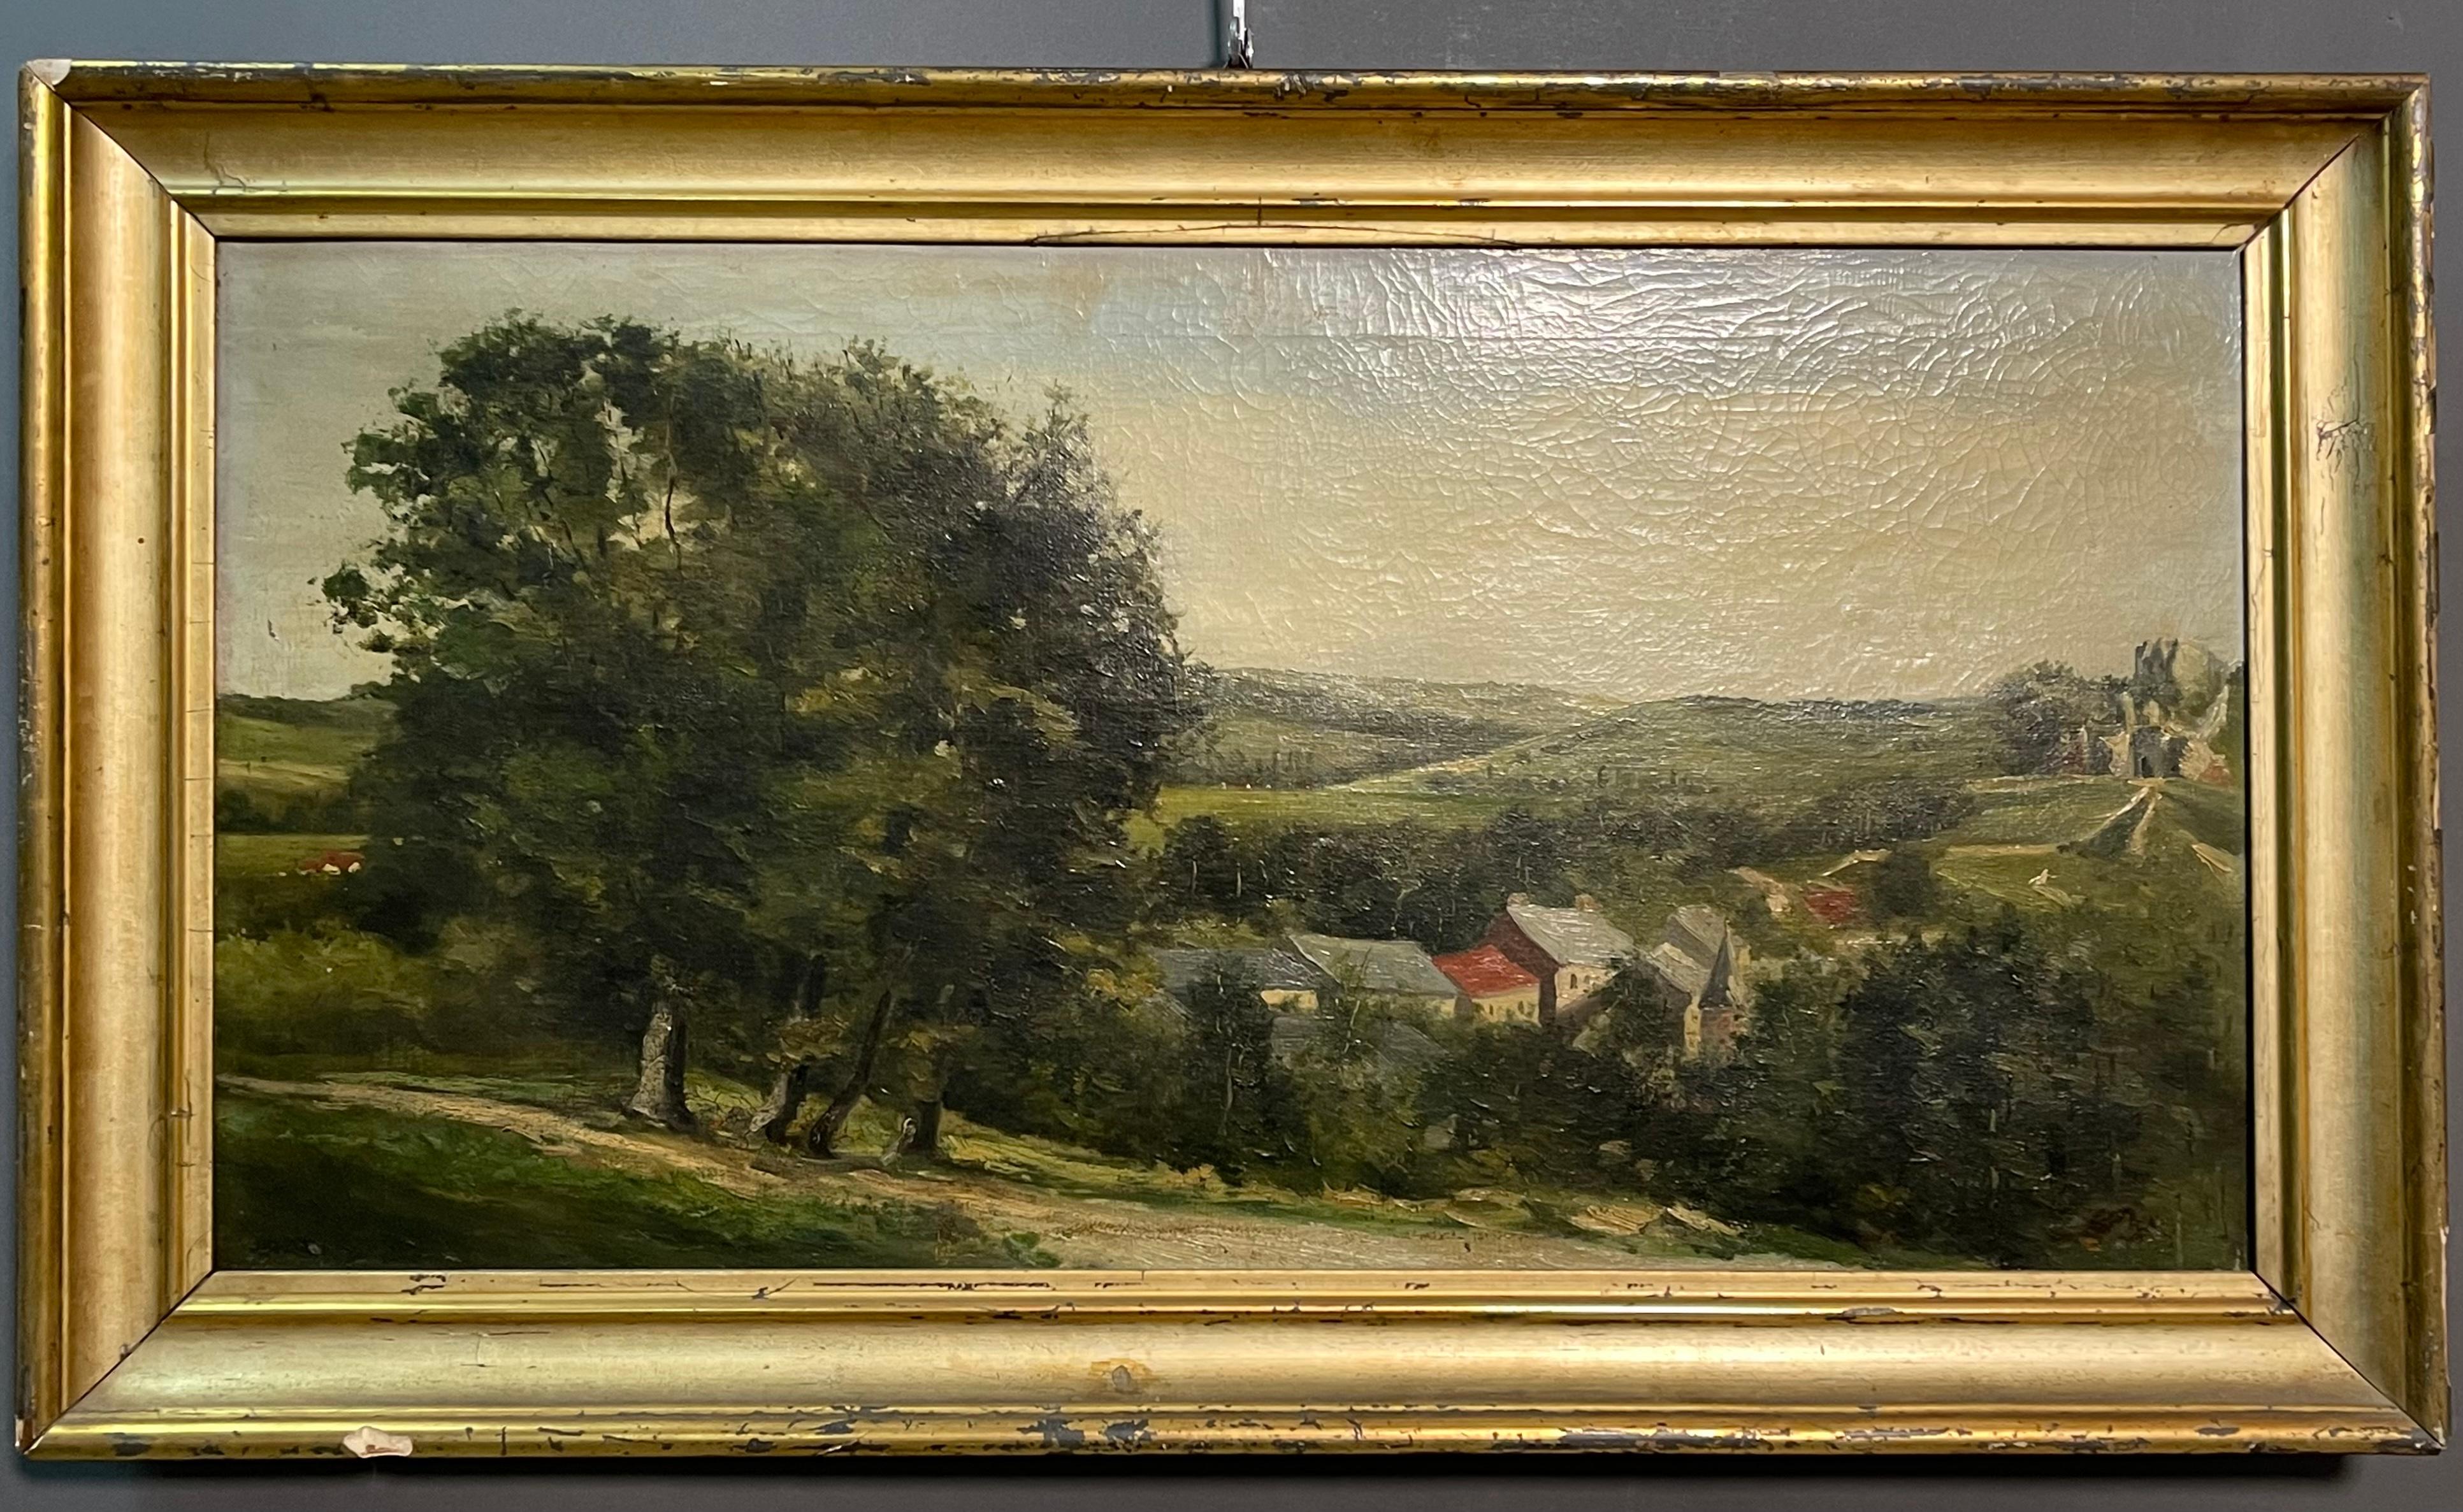 Beautiful and evocative oil painting on canvas depicting a gentle hilly landscape with trees in the foreground and a village in the background

This painting, never before on the market, comes from a private collection and is beautified by an